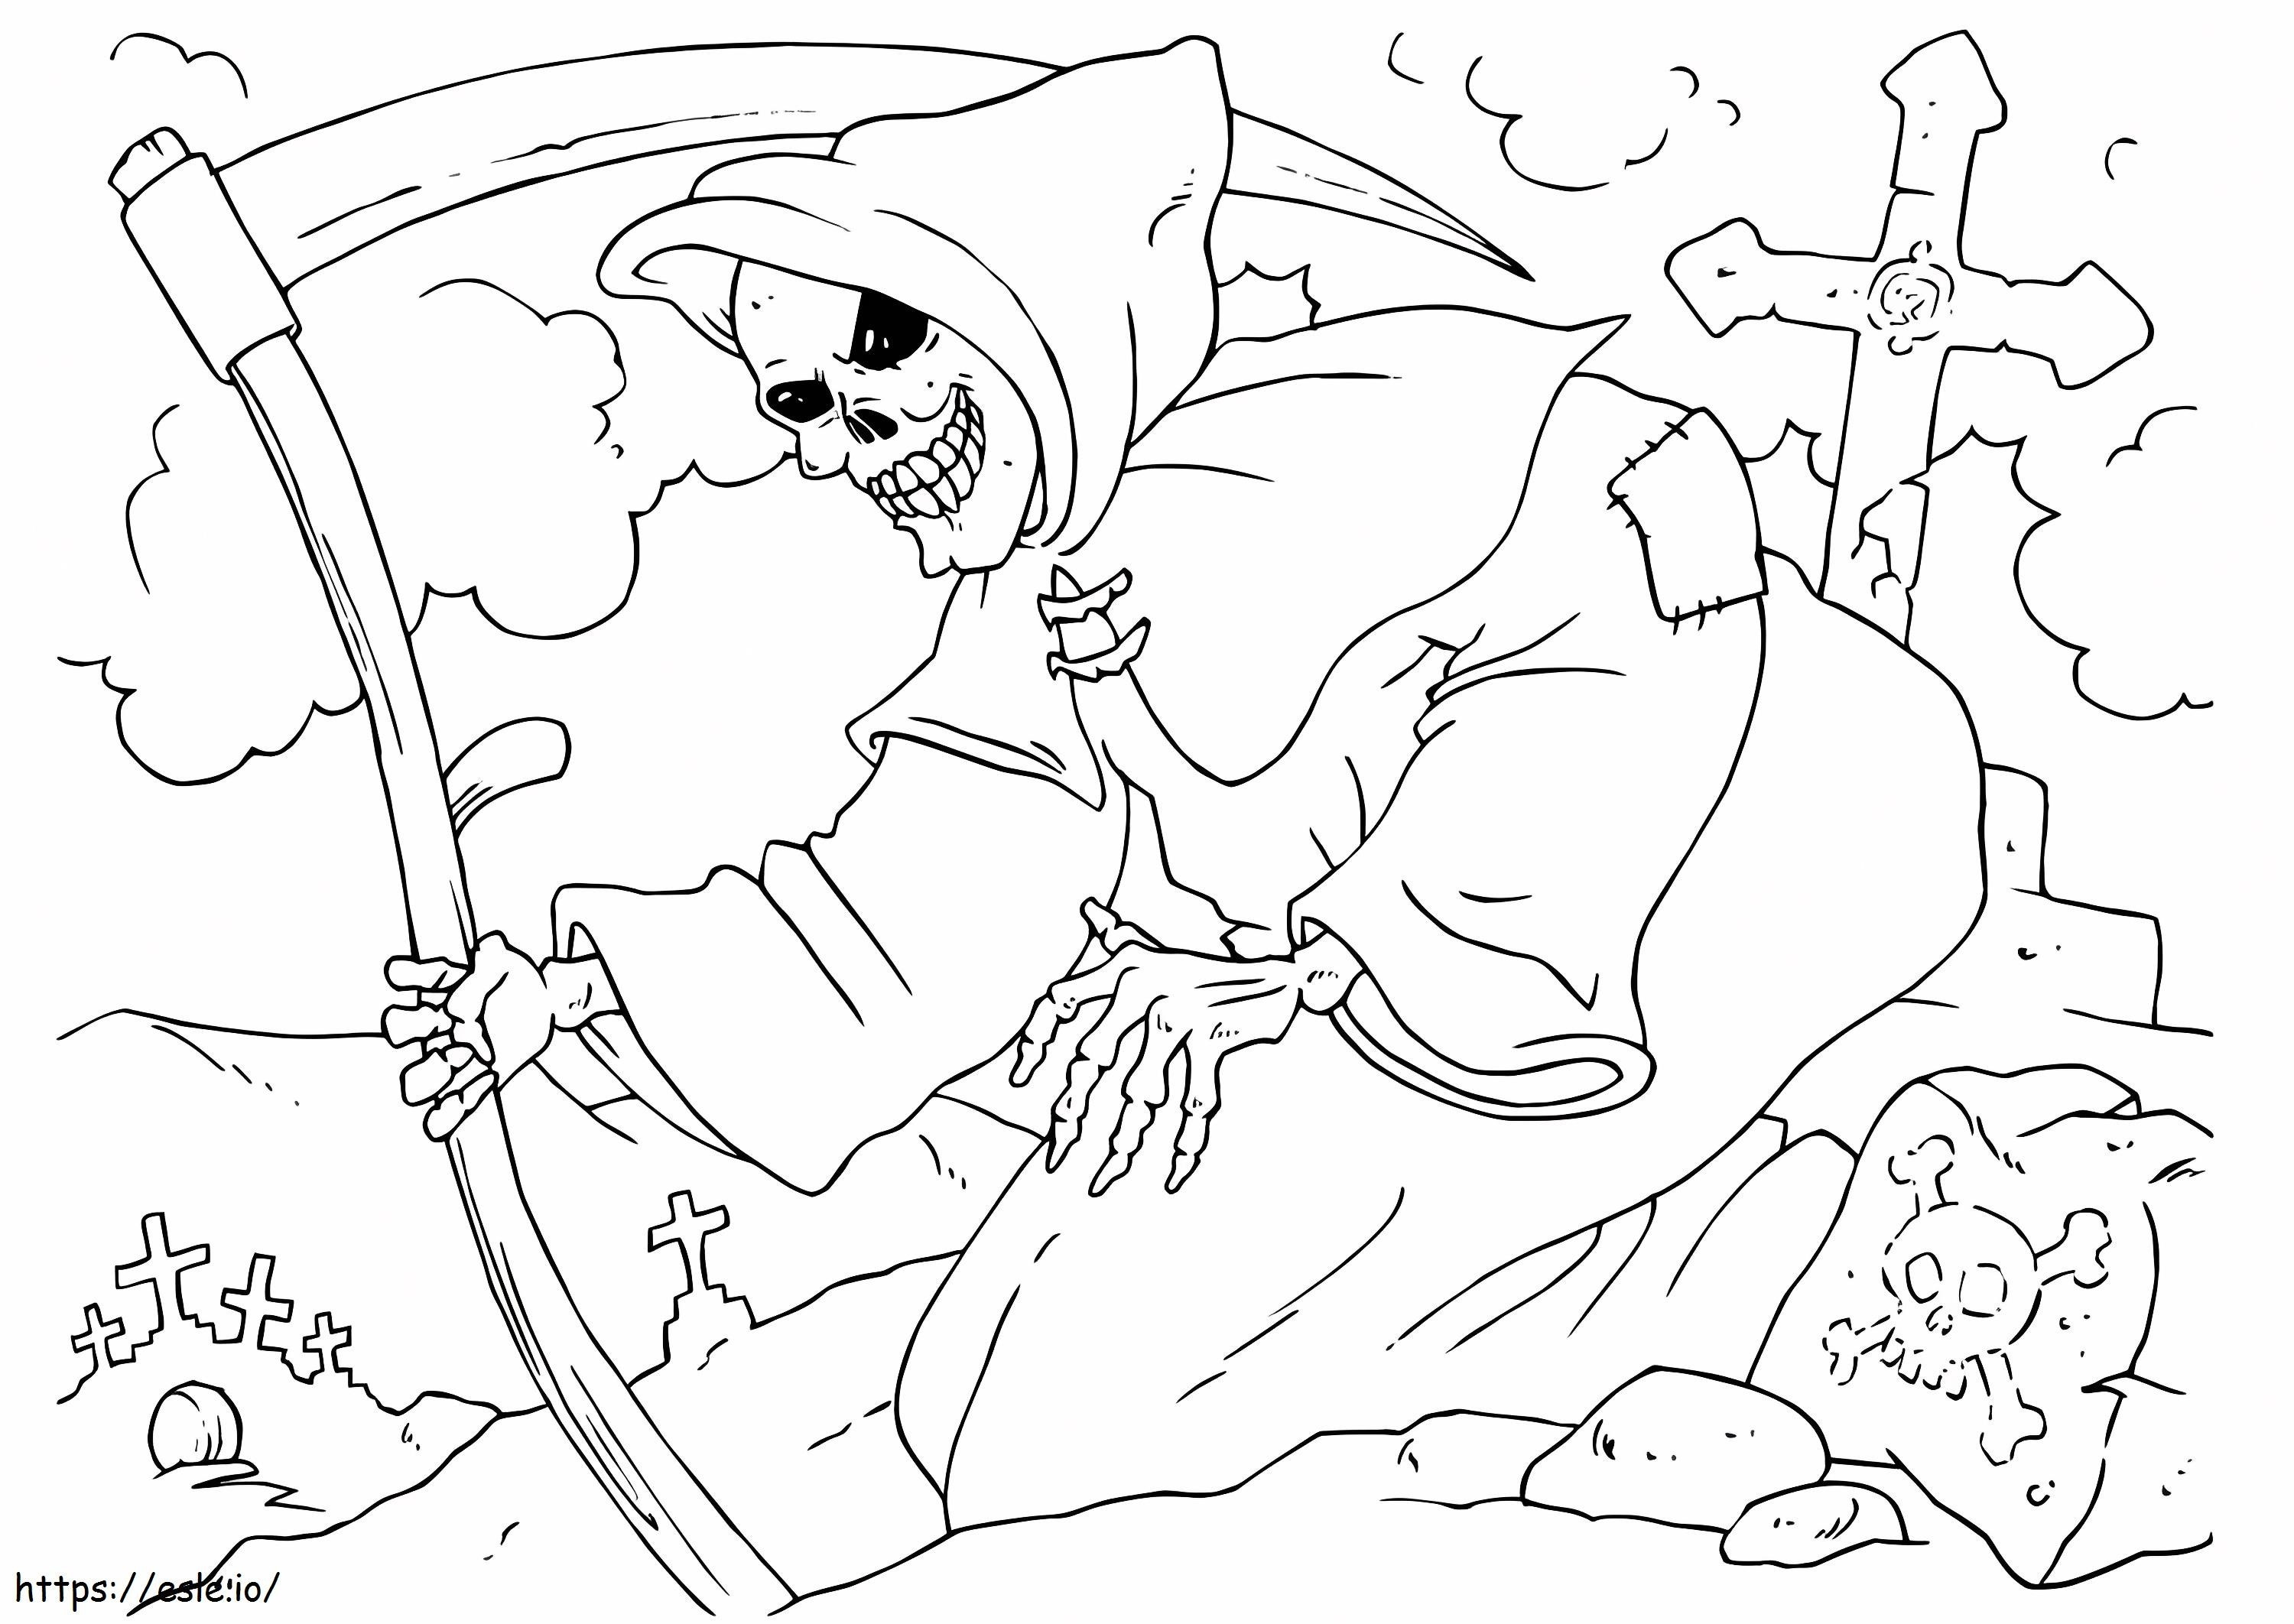 Grim Reaper 6 coloring page